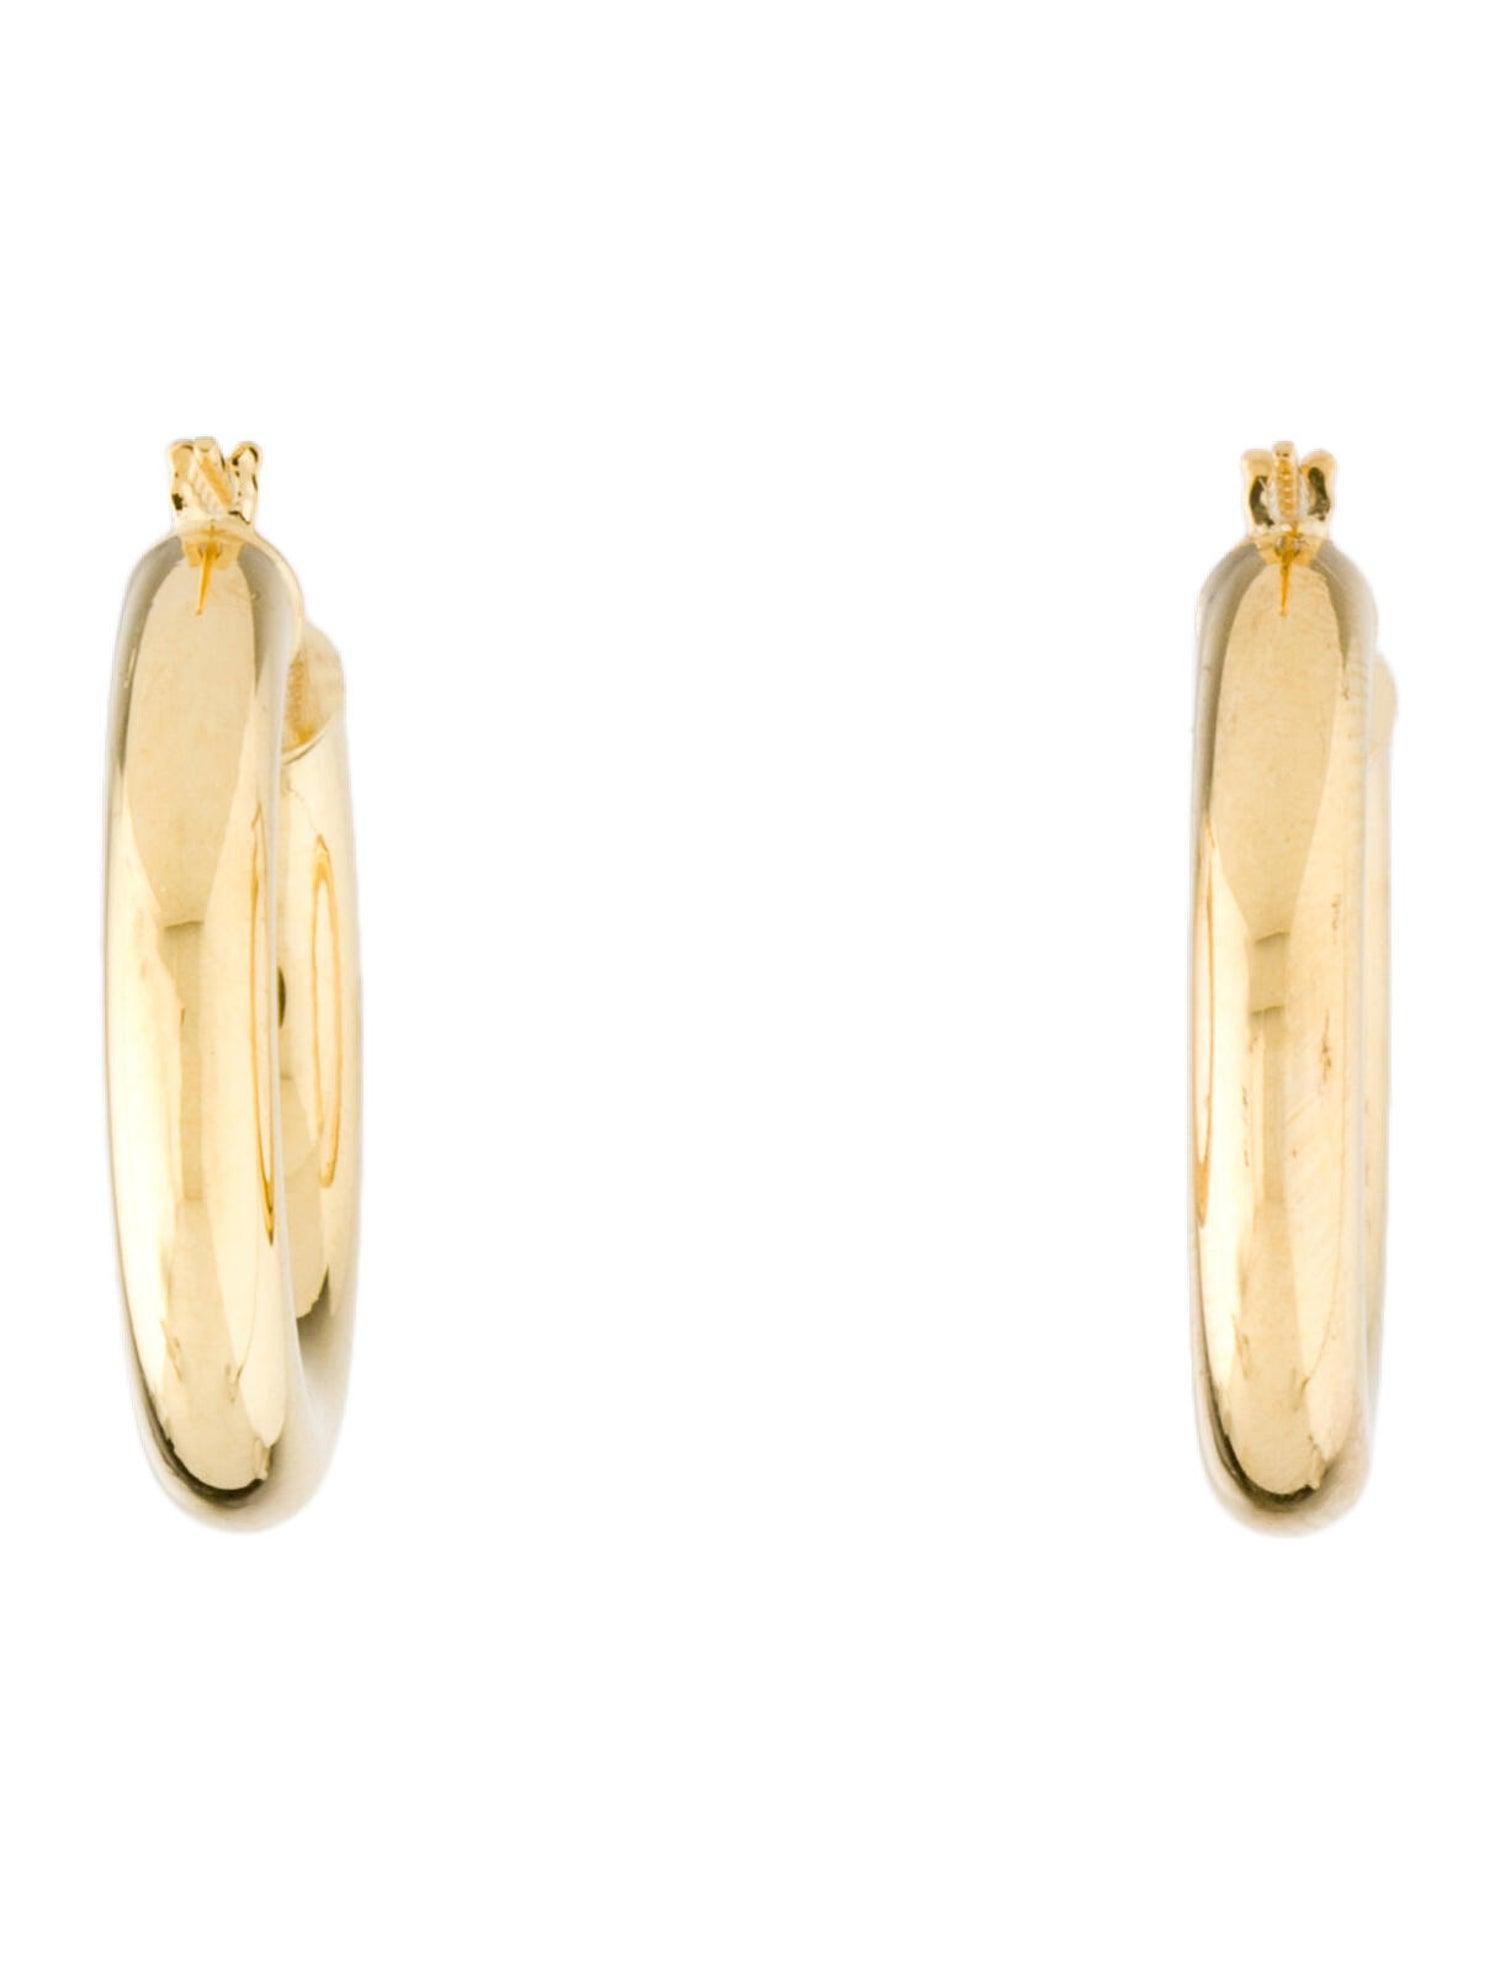 These Elegant and Stylish 14K Yellow Gold Hoop Earrings will add that perfect Glam to your look! Earring Measurements are 4 MM thick and the diameter is 15MM. 
Made in Italy. 
15MM Diameter.  
Gift Box Included.